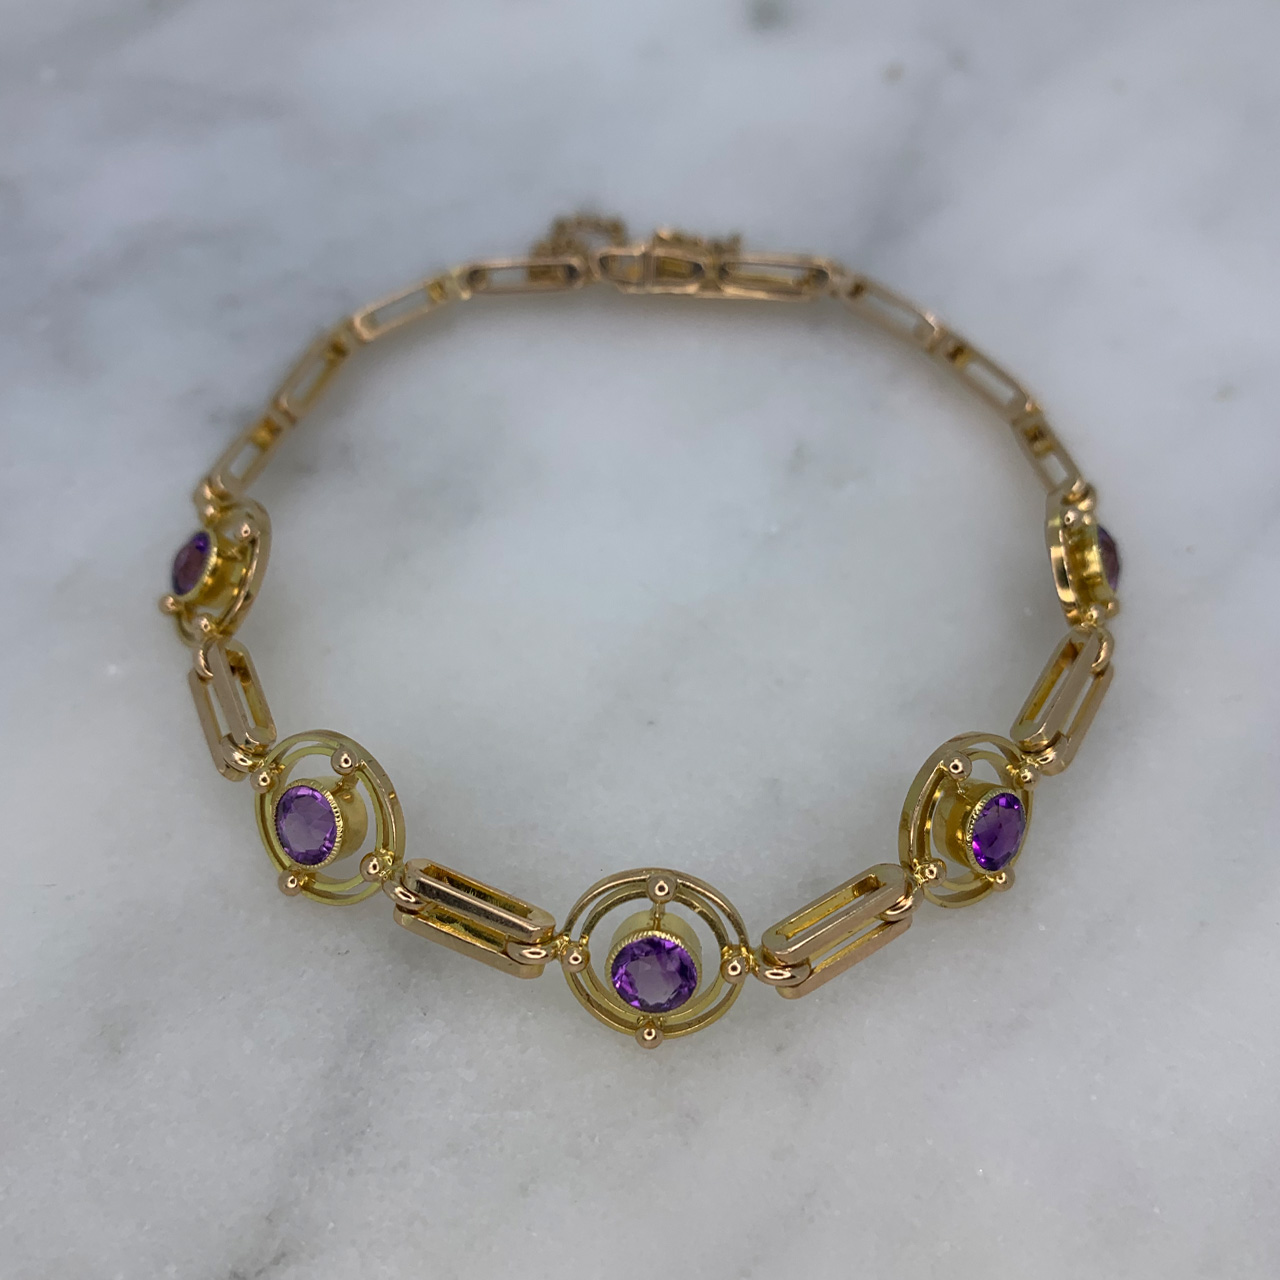 Exquisite Edwardian Gemetric Amethyst Bracelet in 15ct stamped buttery yellow Gold. The bracelet has five 4.3 diameter Cabochon amethysts in rub over setting, surrounded by a cicular design circa the Edwardian era. The gate link chain fastens with a snap clasp and box and measures 182mm, with a 60mm safety chain. Immaculate condition and craftsmanship. 